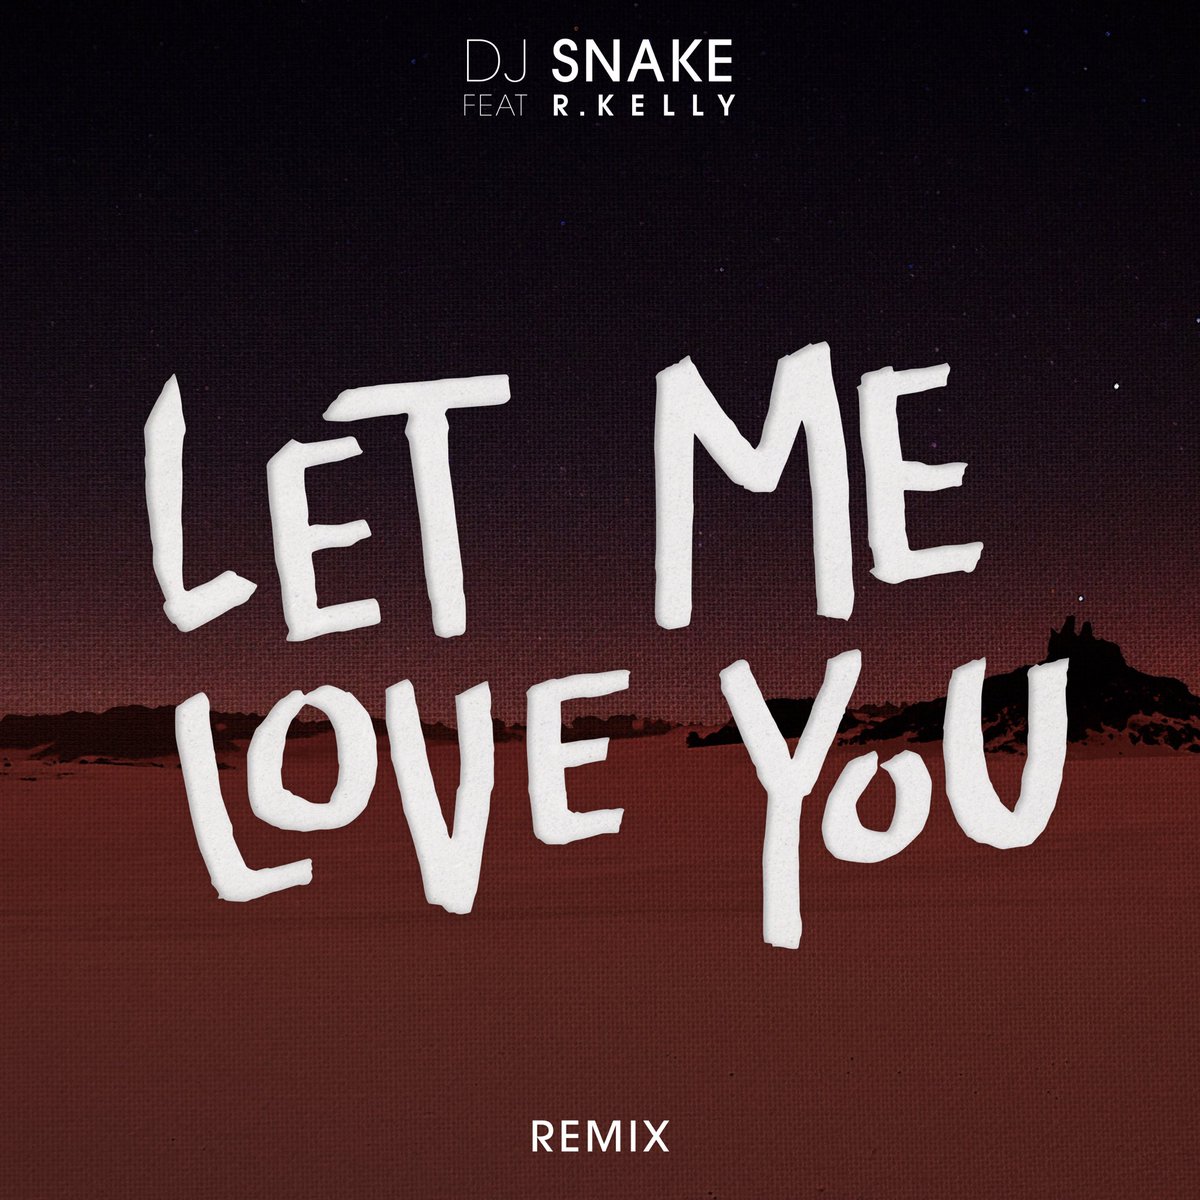 RT @djsnake: Honored to have one of the greatest to do it remix 